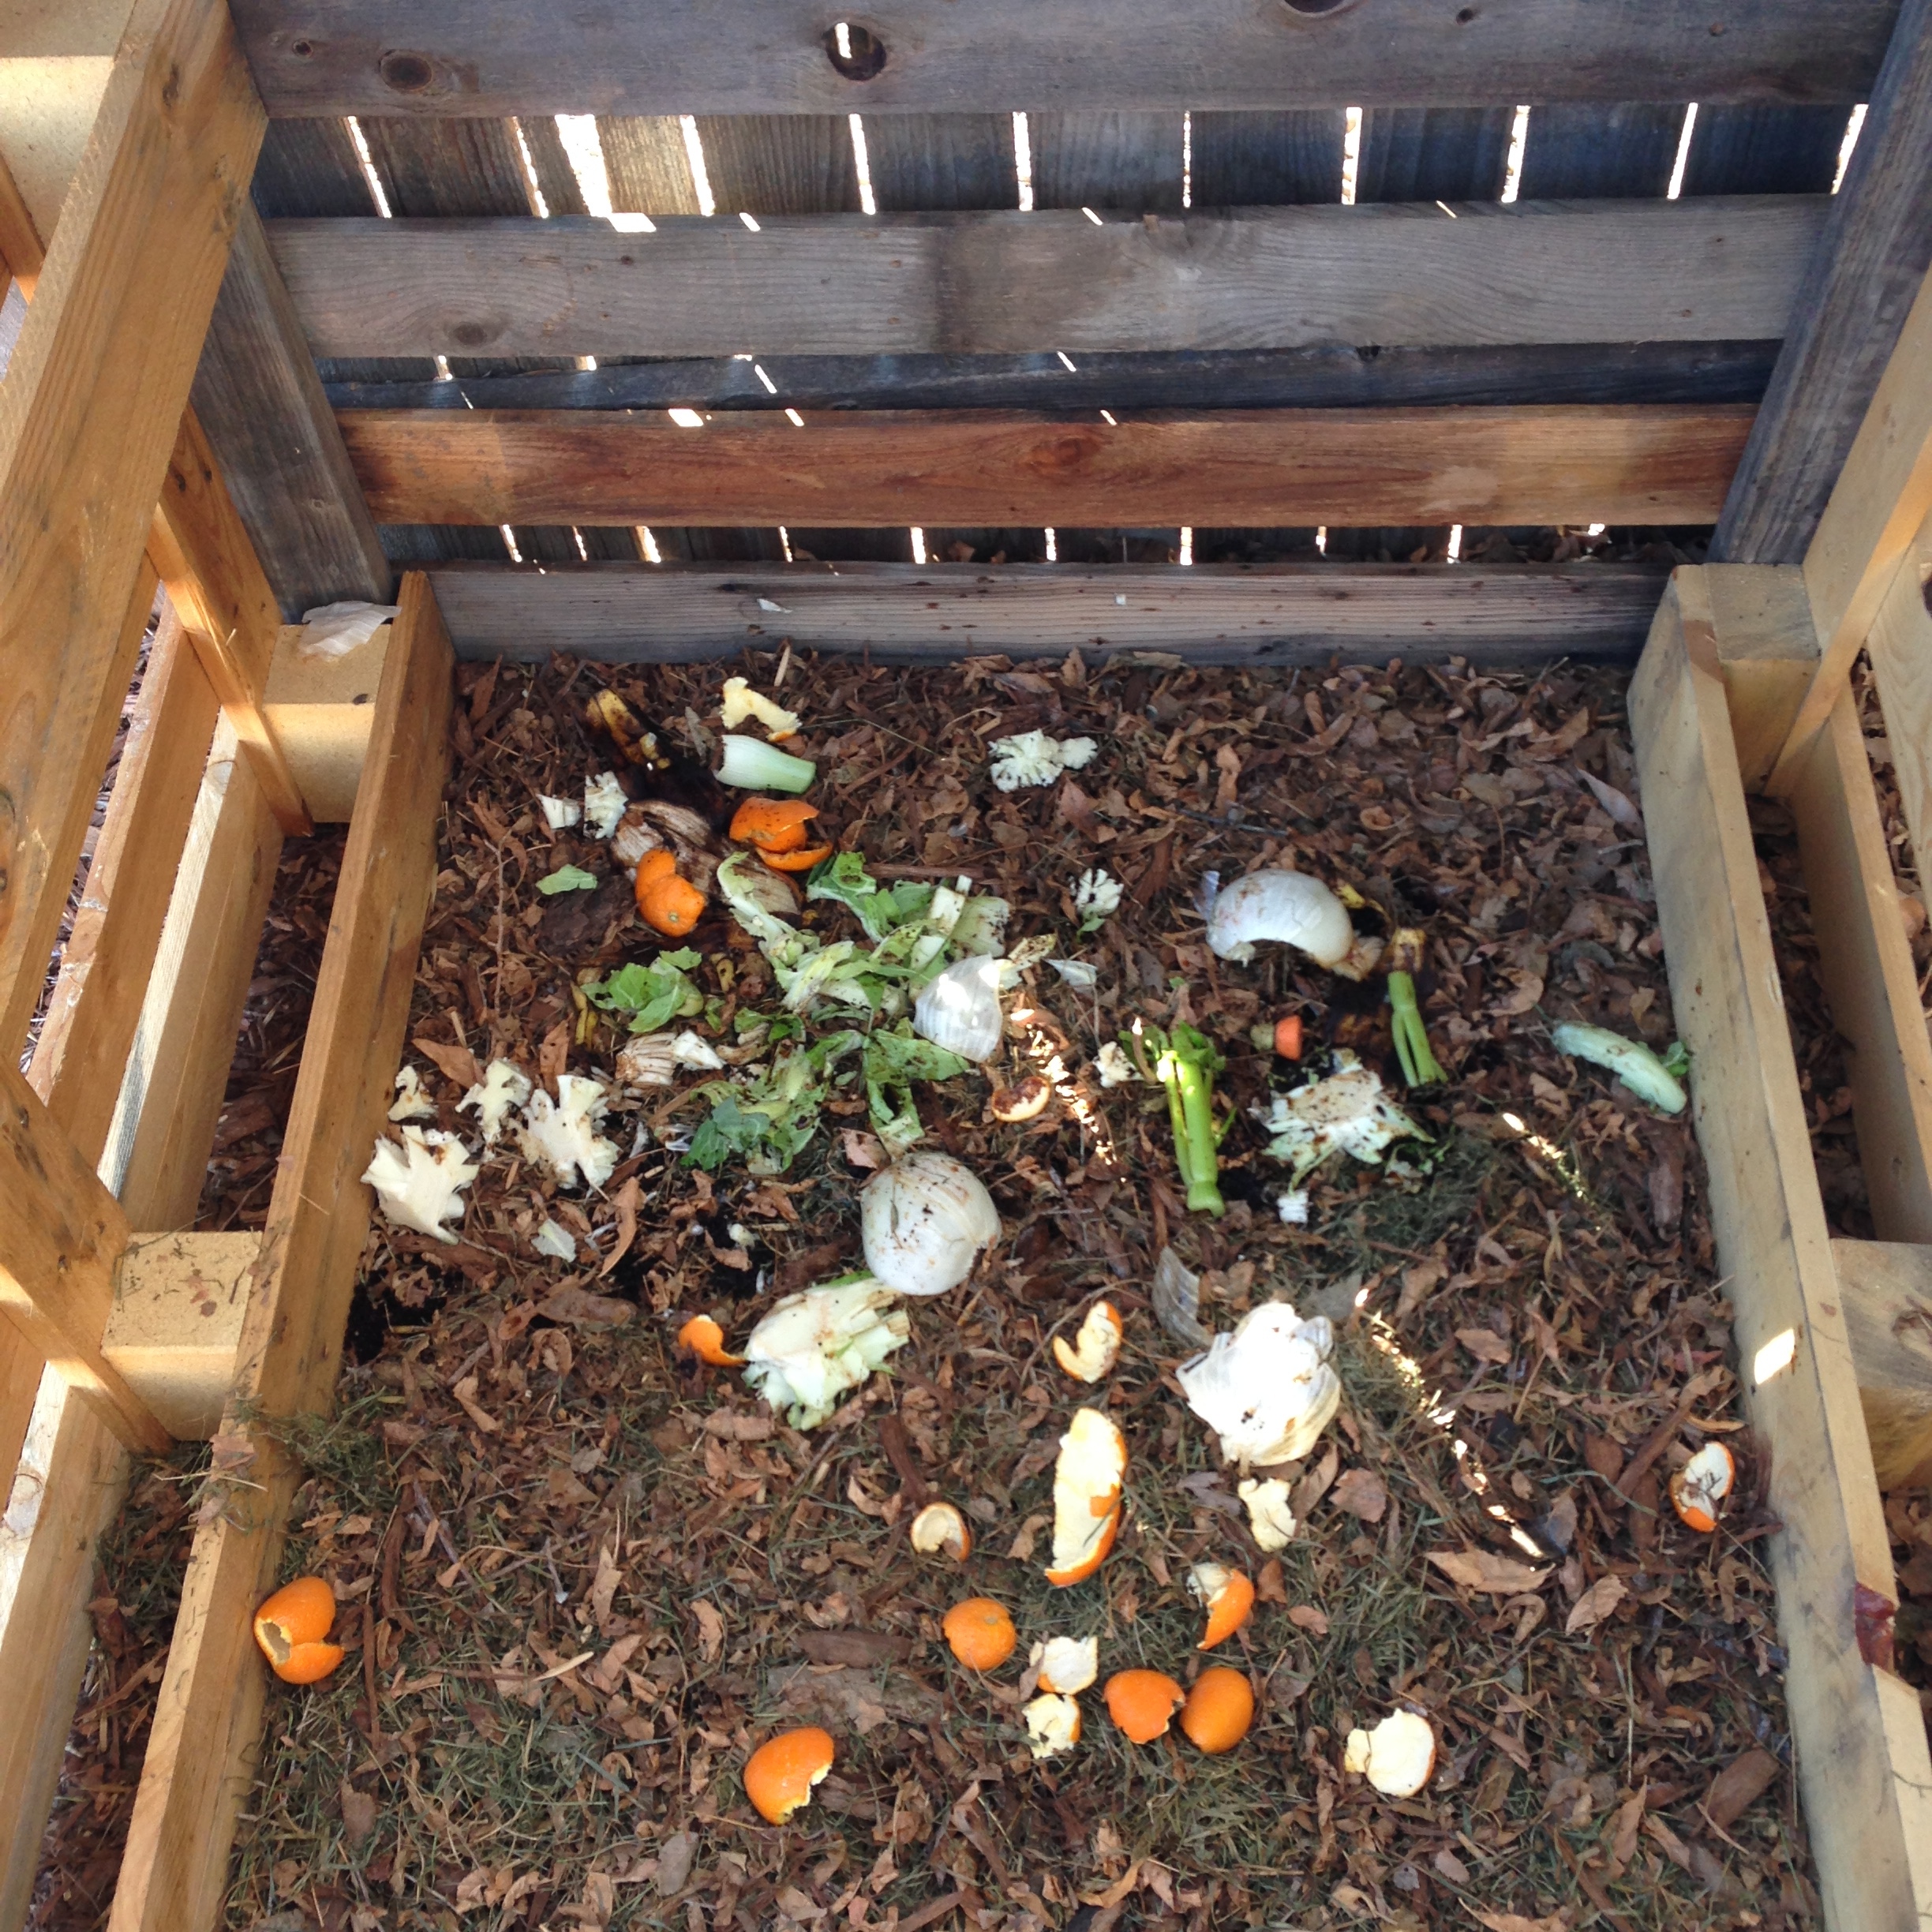 7 DIY Ways to Compost at Home